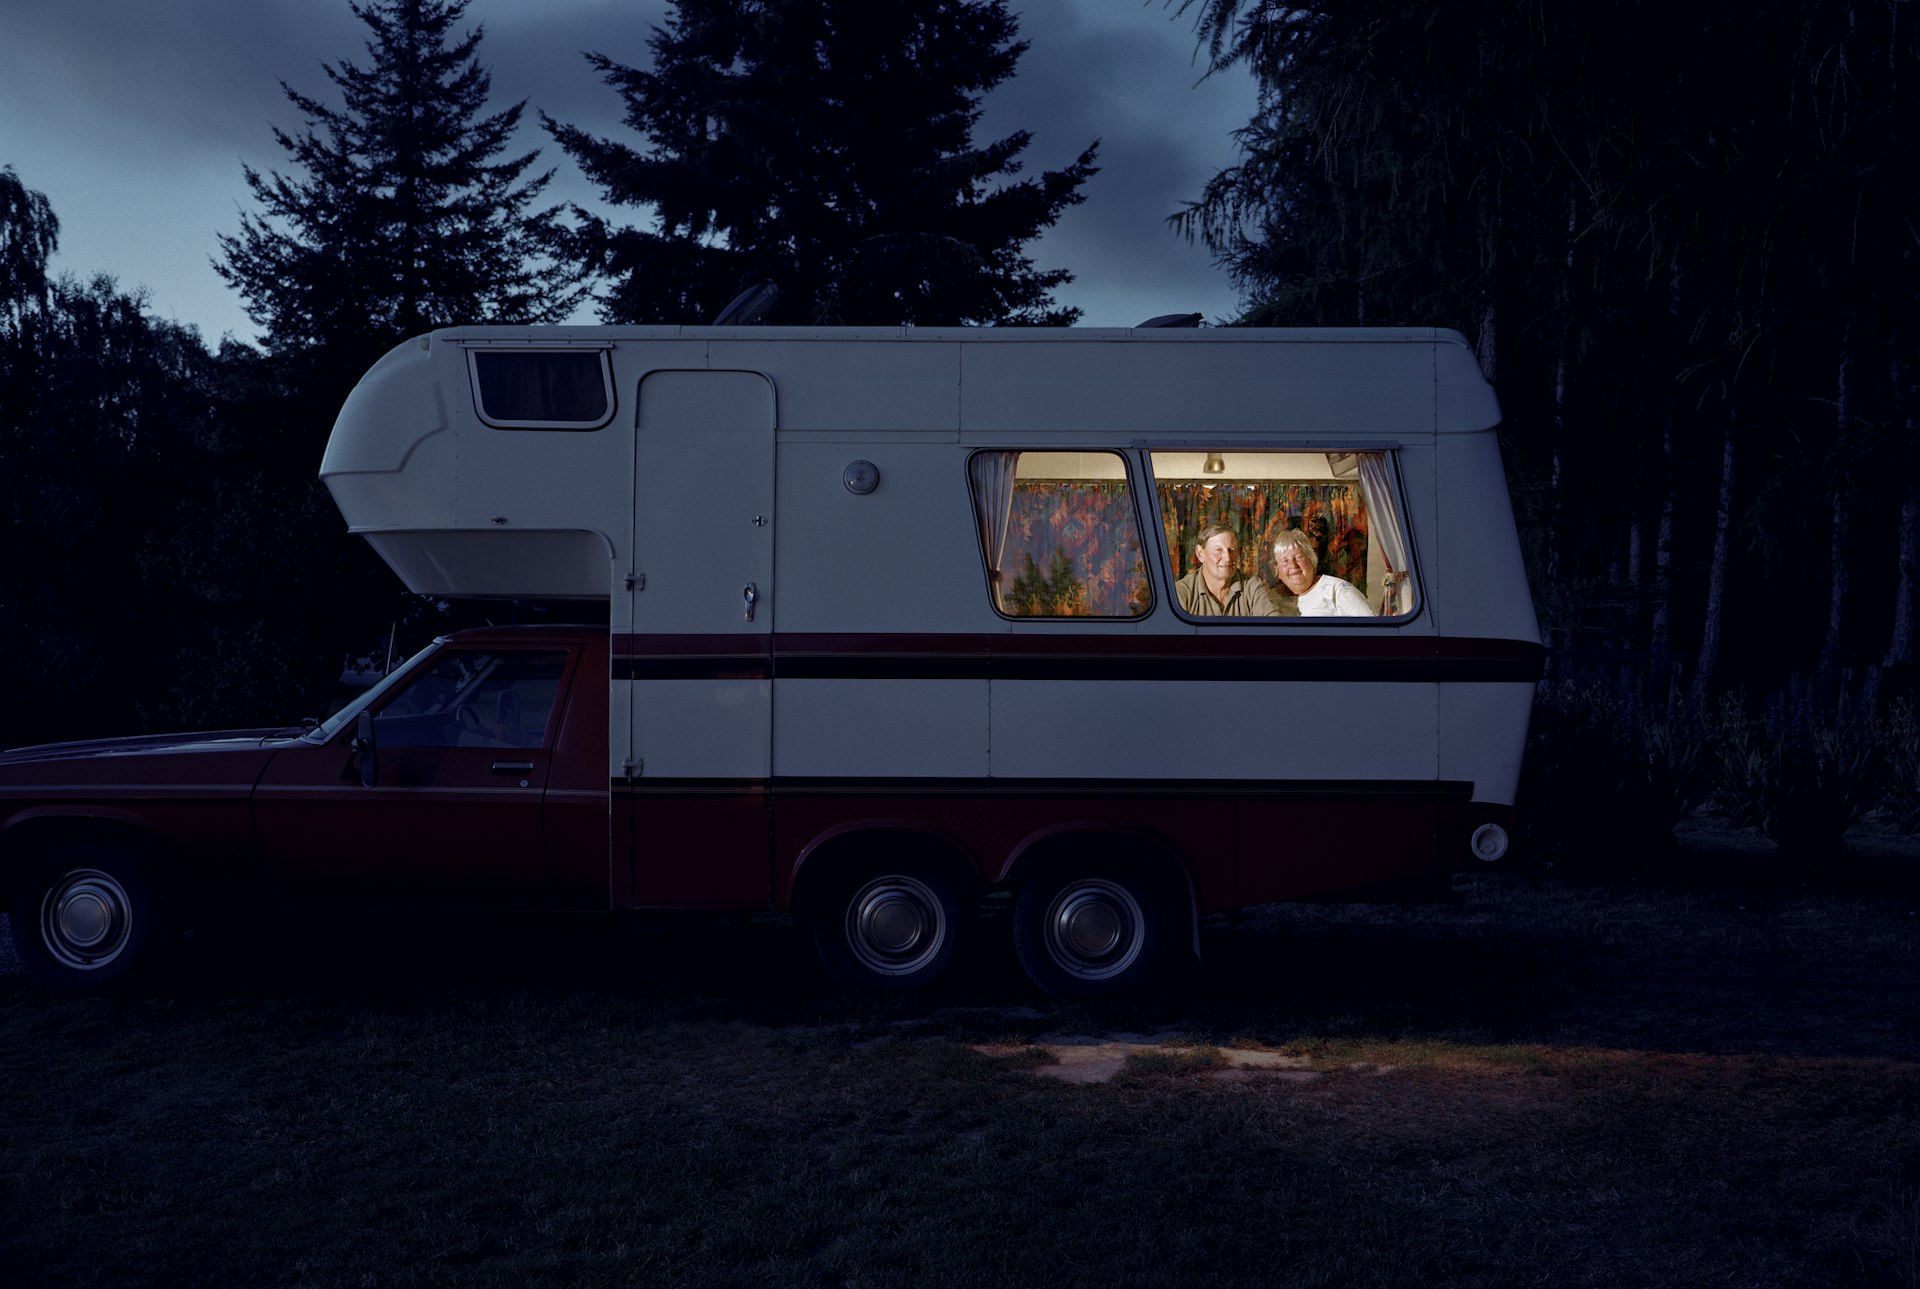 An elderly couple sitting inside their brightly-lit campervan are seen through the window with the Auckland darkness outside